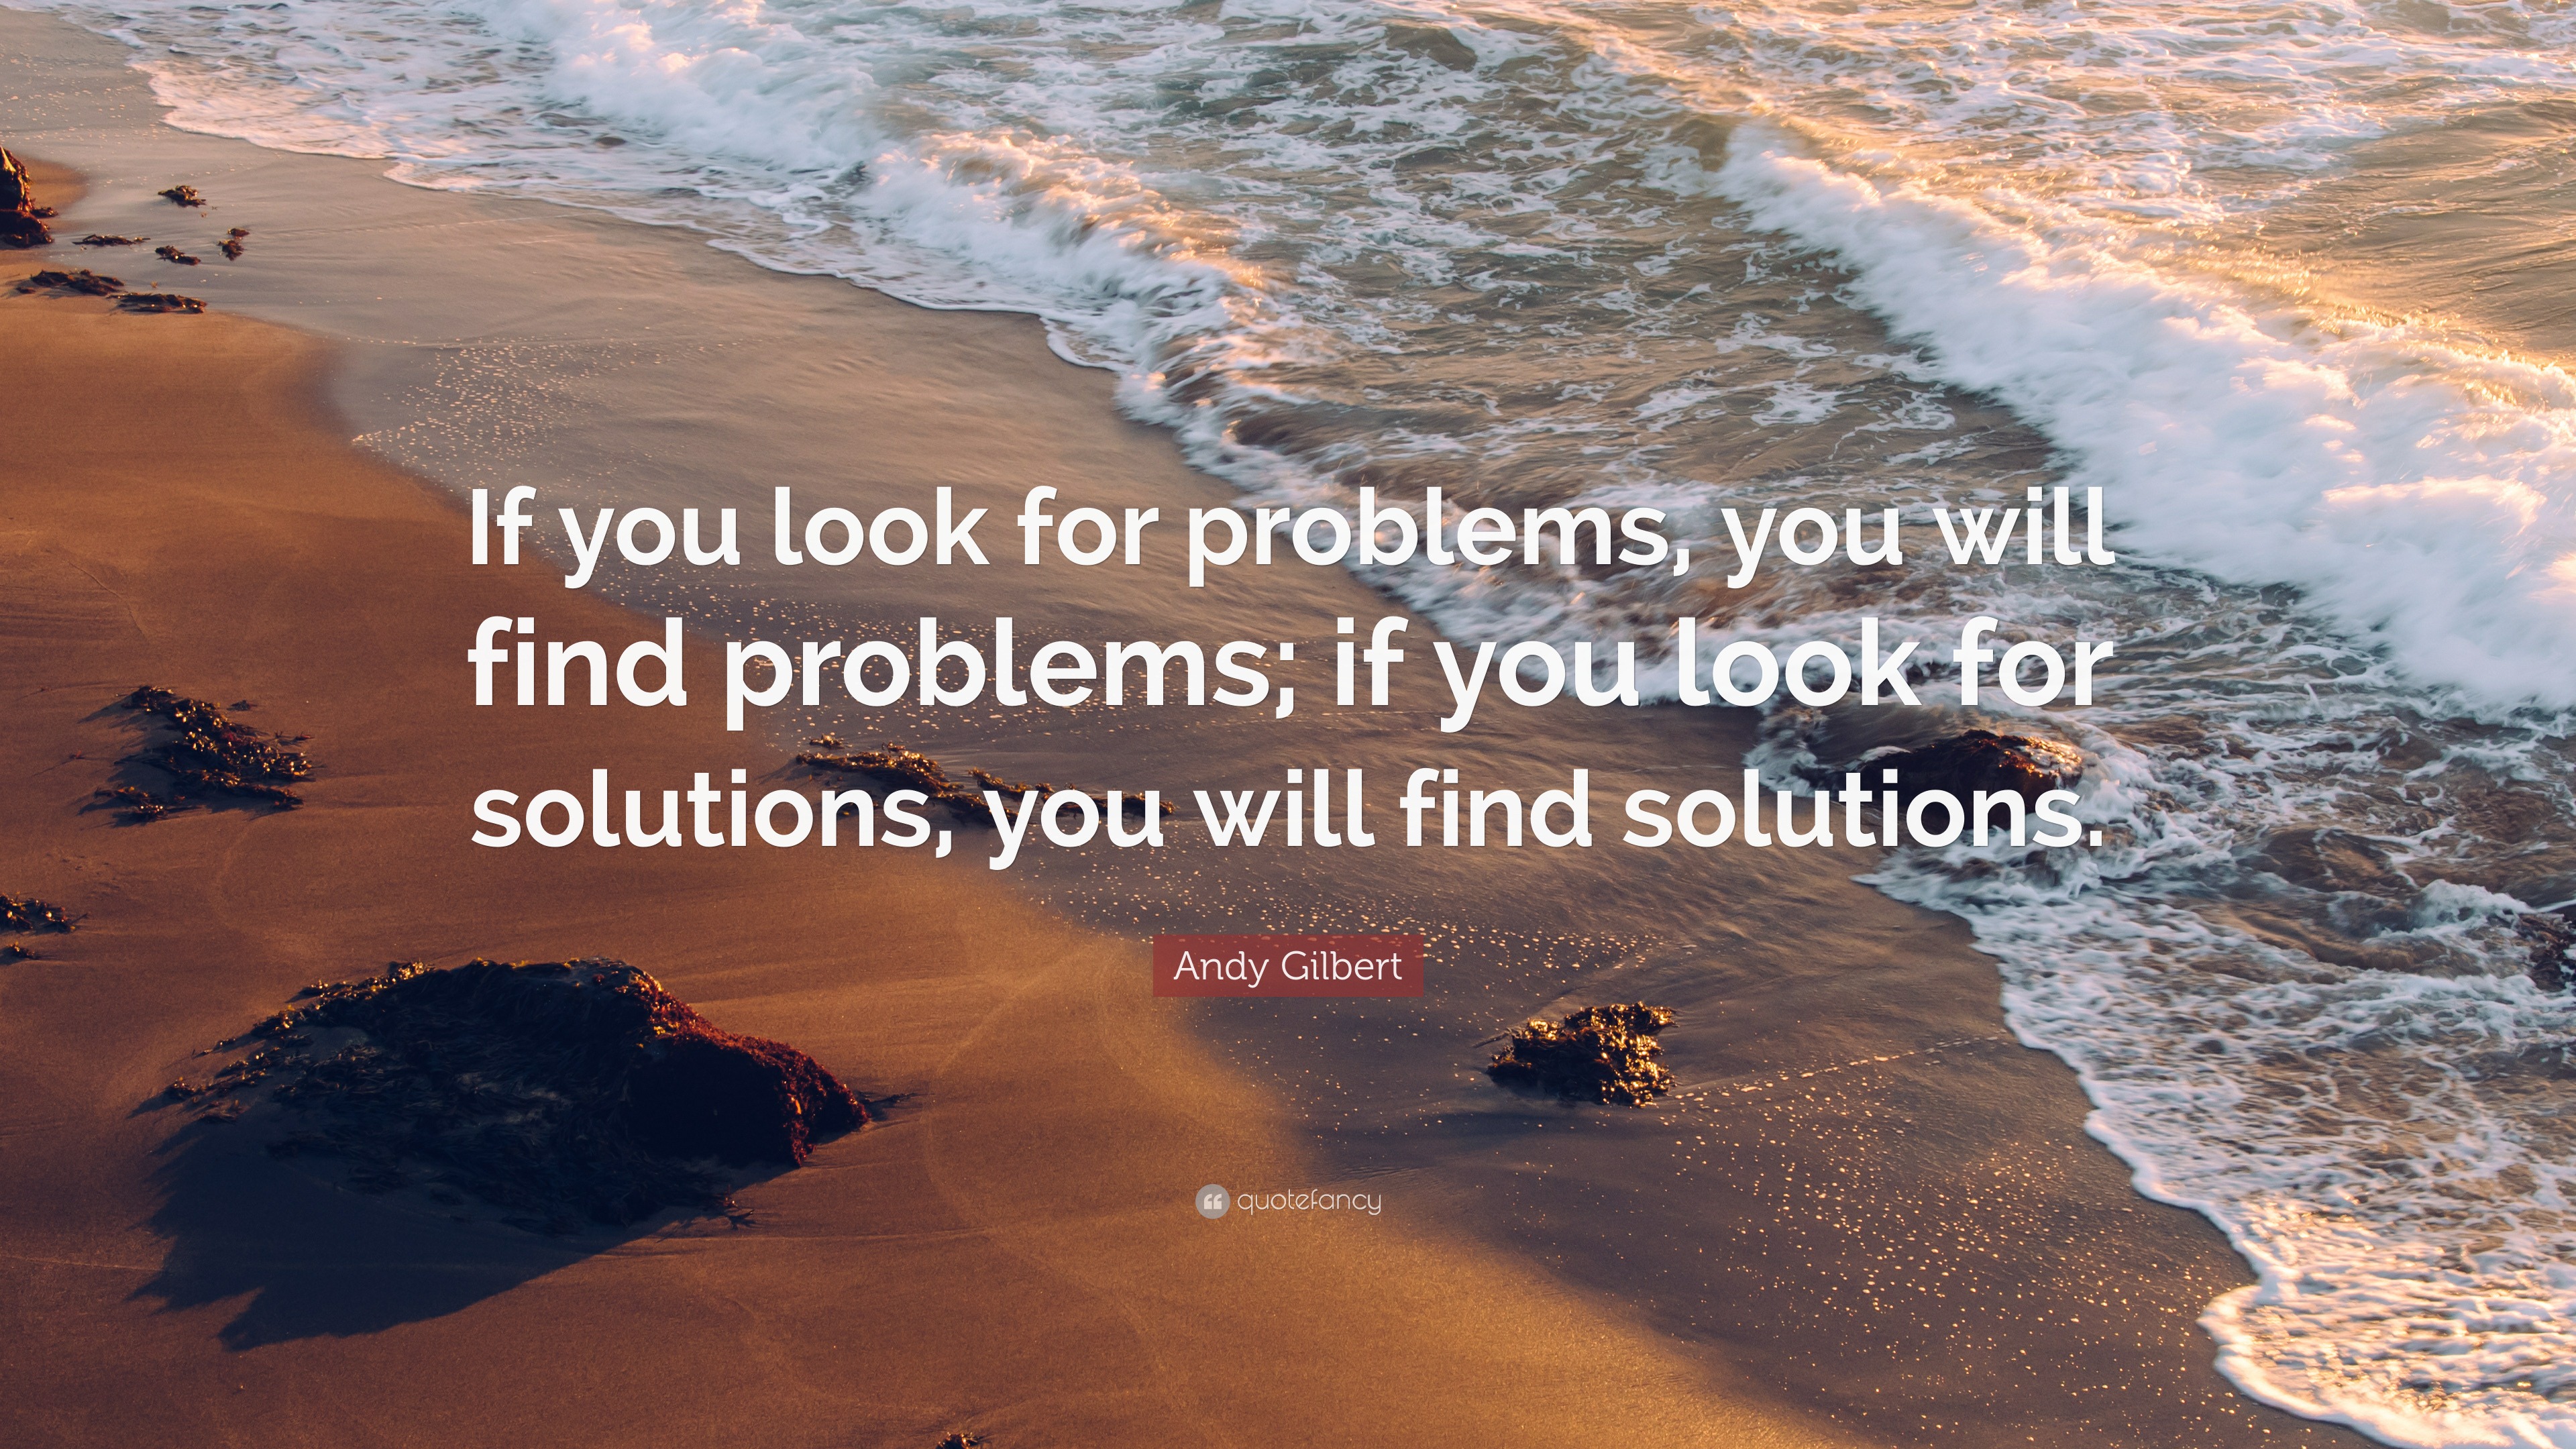 famous quote on problem solving